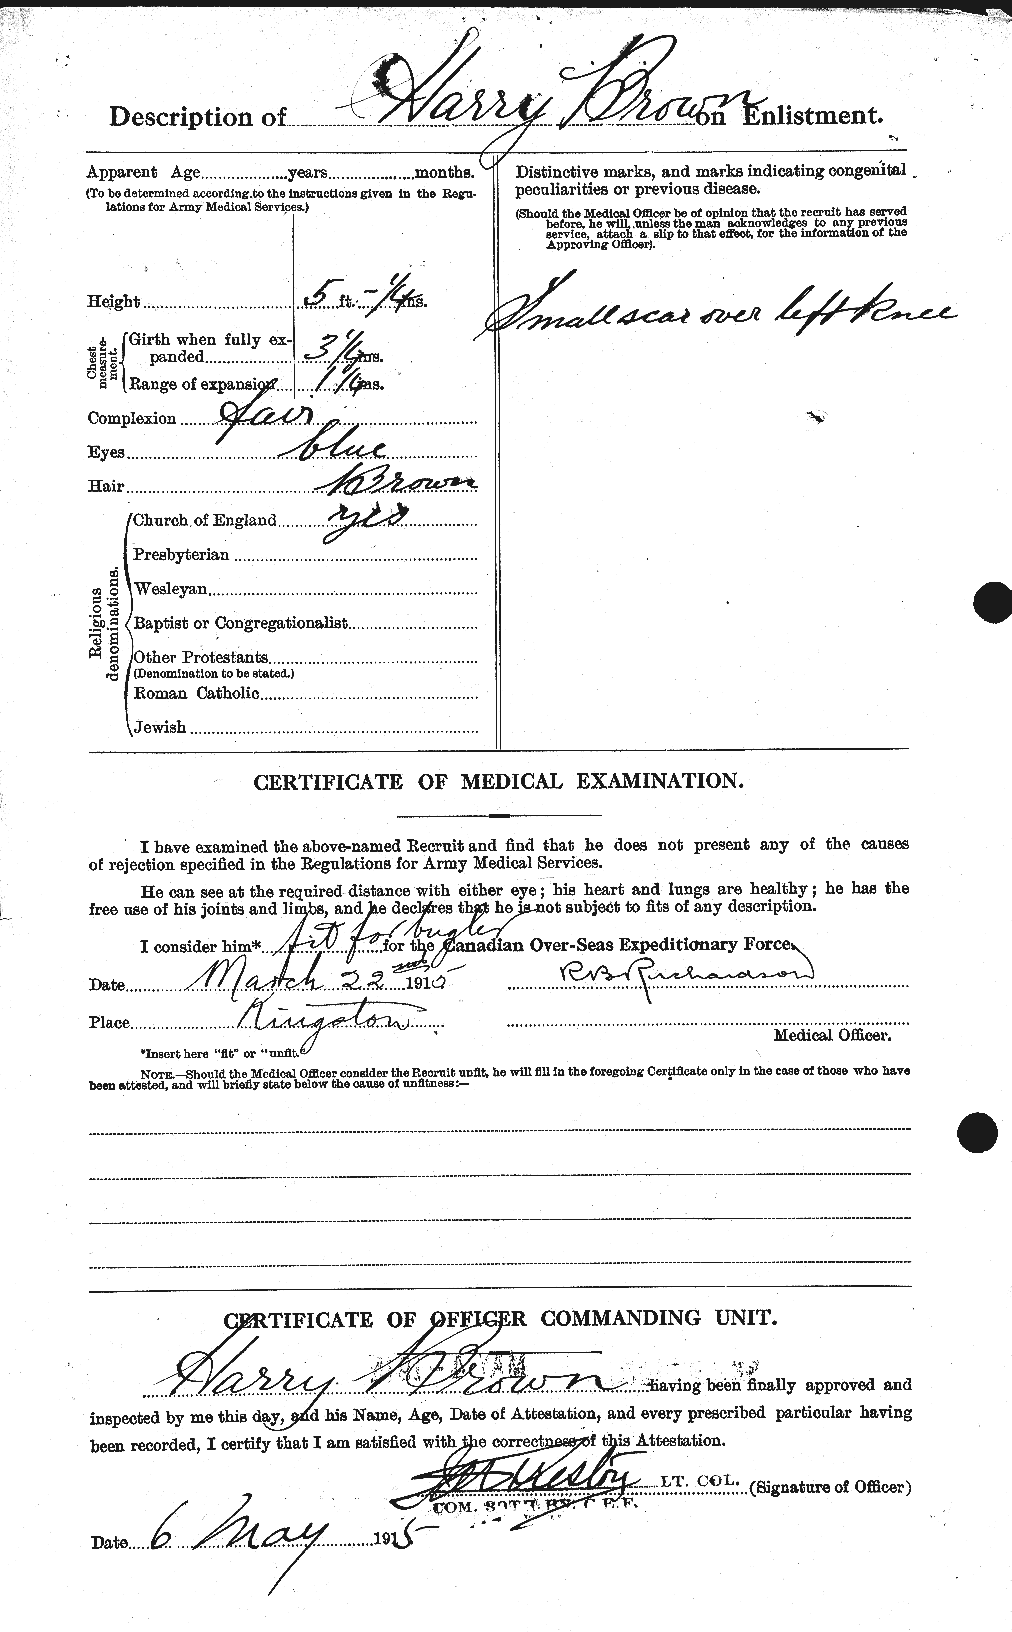 Personnel Records of the First World War - CEF 265397b